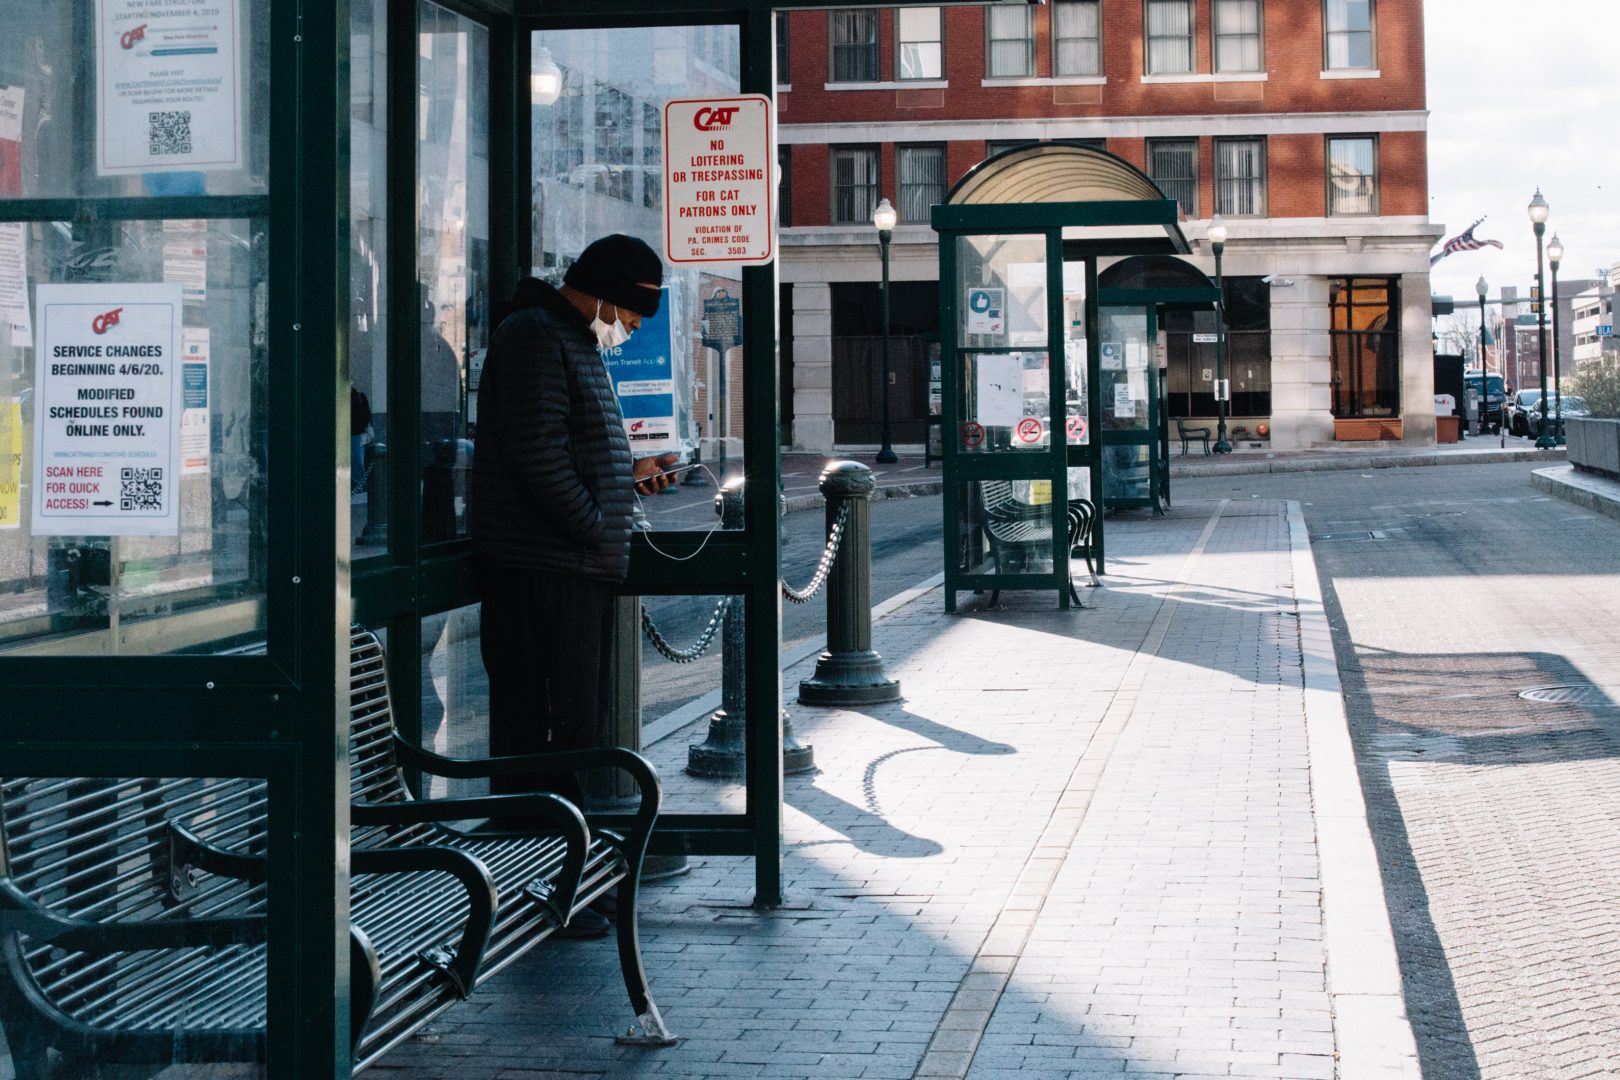 A man wearing a mask over his mouth checks his phone while waiting for a bus in Harrisburg on April 10, 2020.